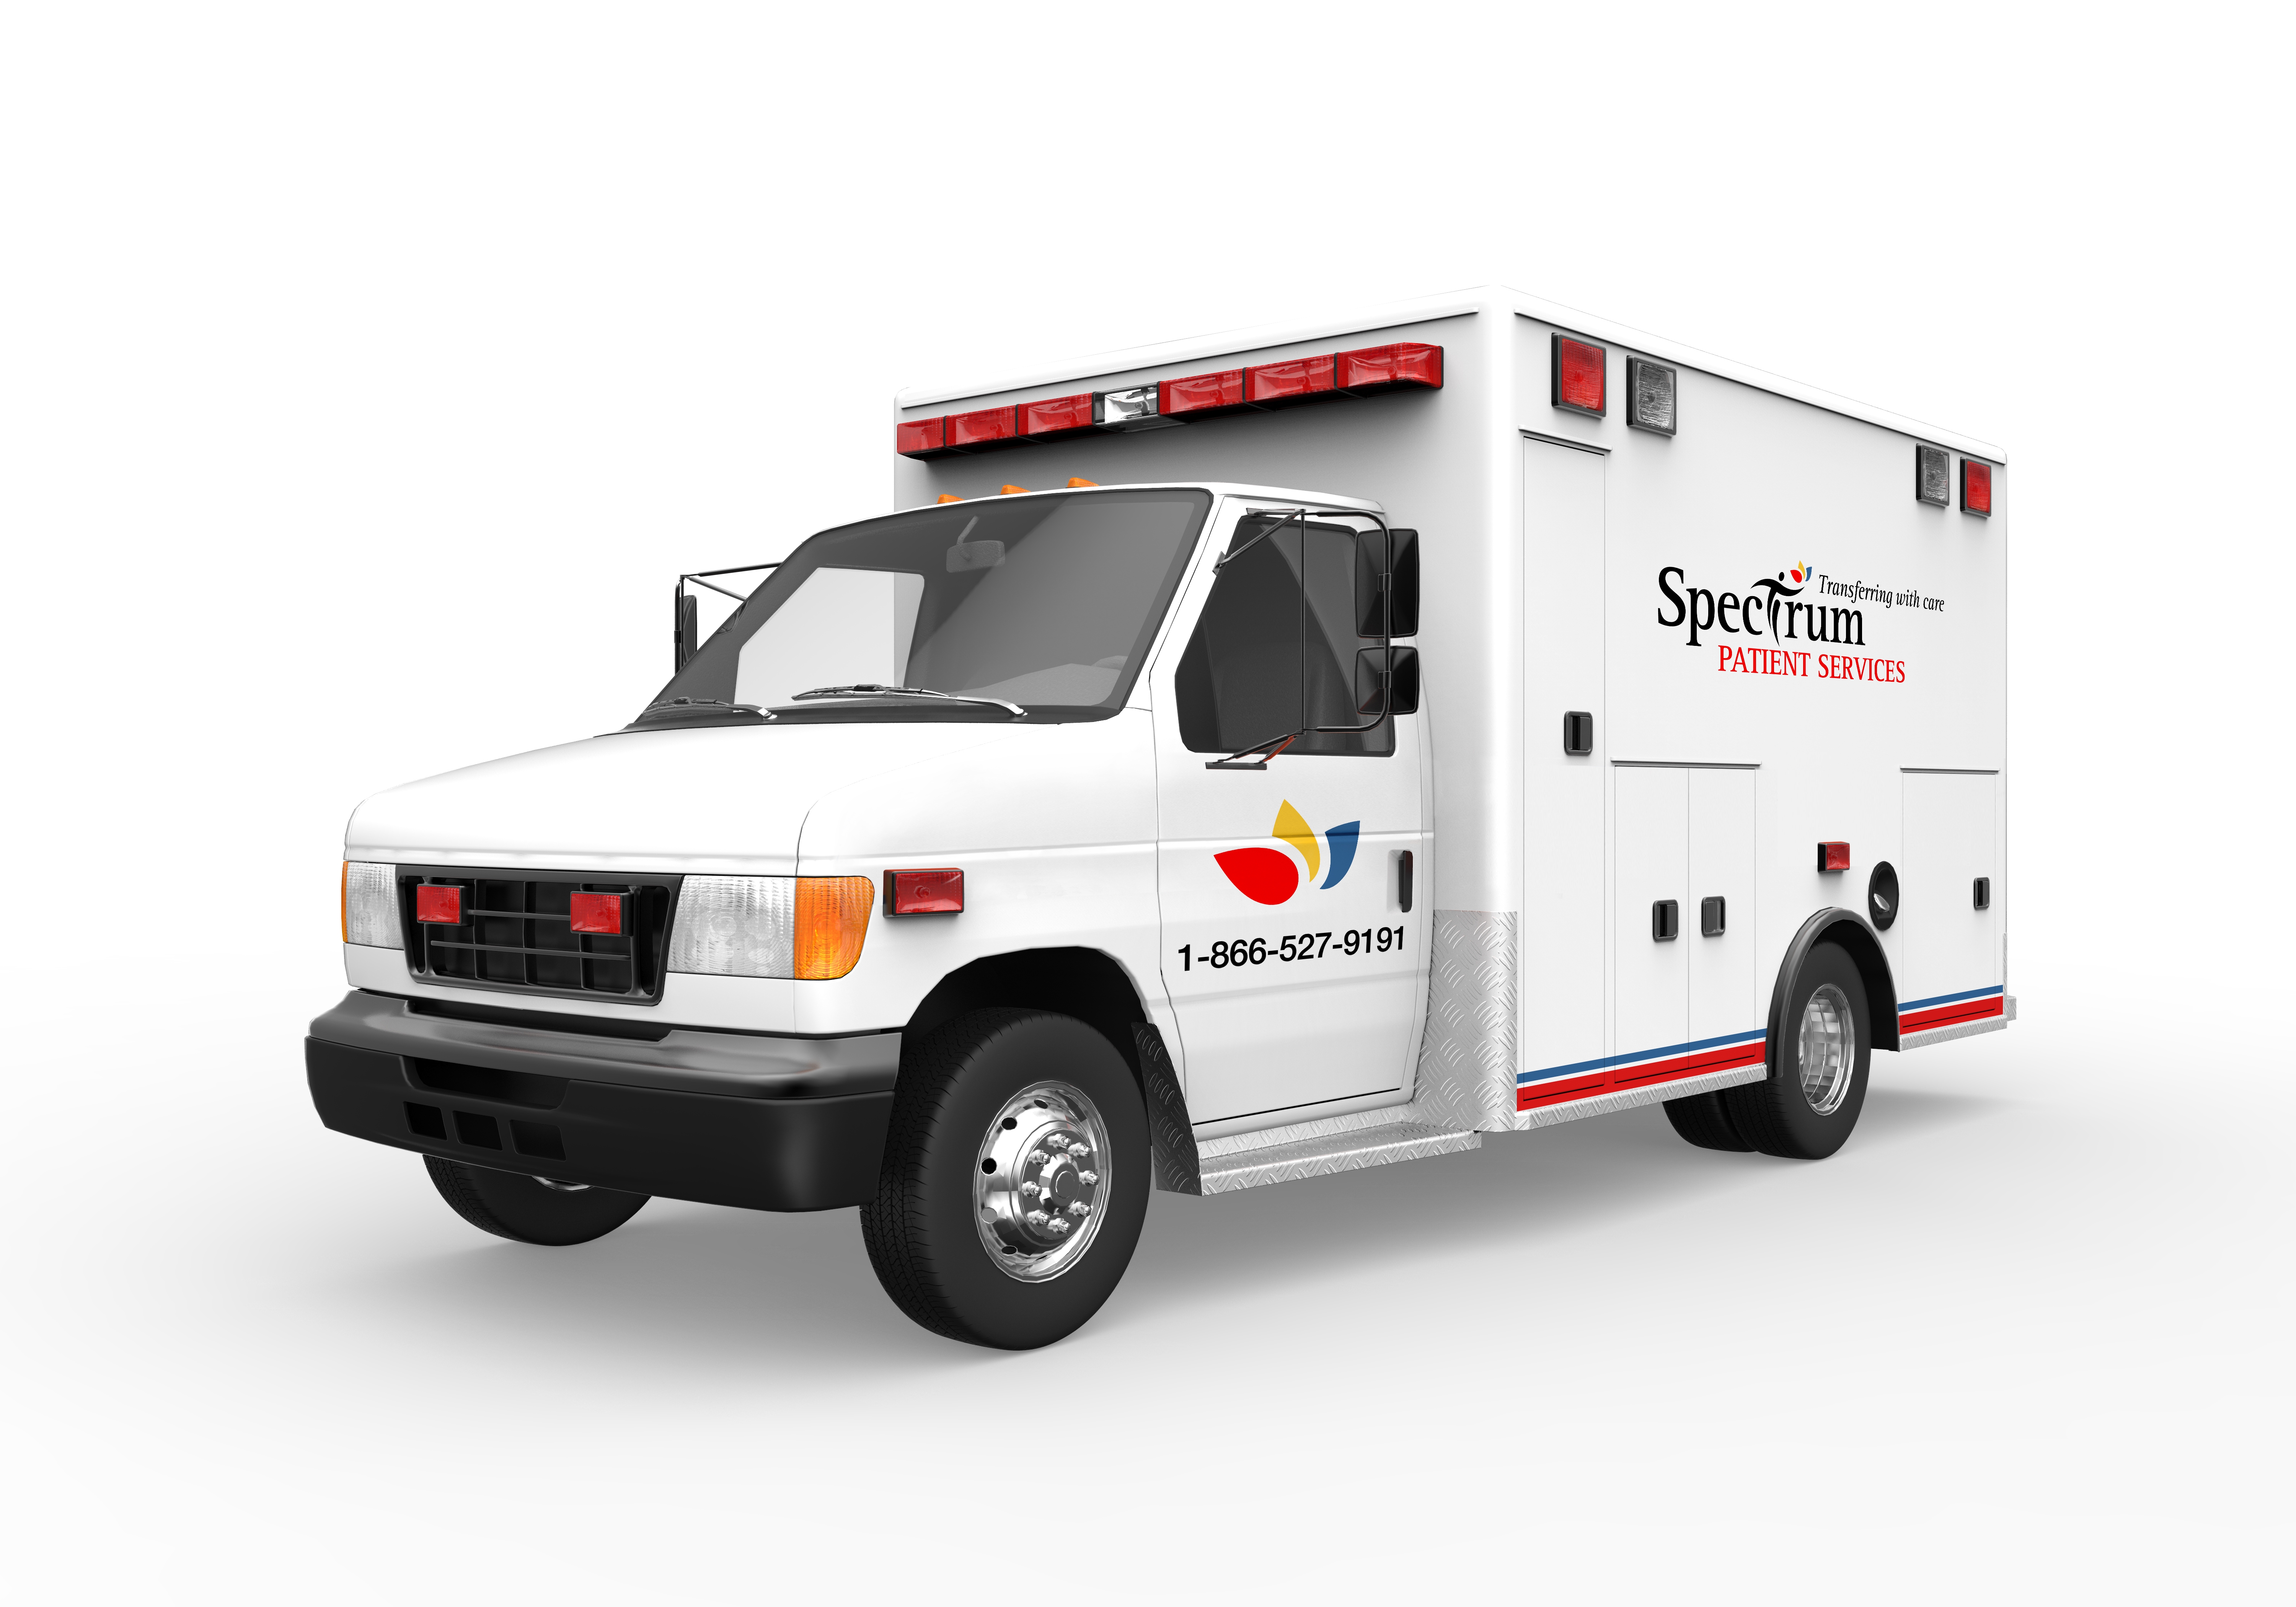 Image: MEDIA RELEASE: Spectrum Health Care enters the non-emergency patient transfer industry